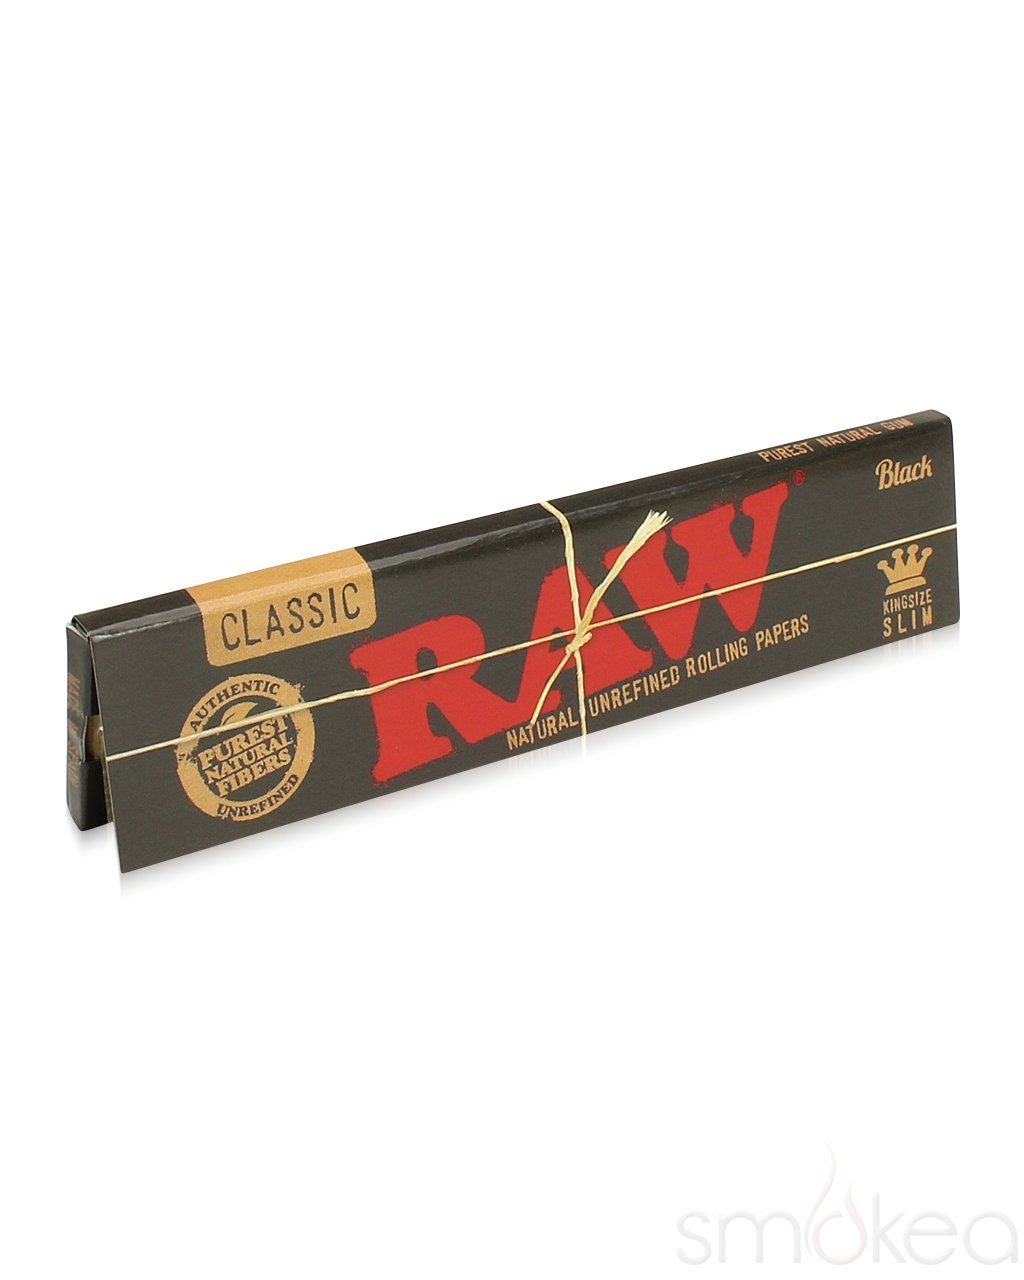 Raw Black Classic King Size Slim Rolling Papers (Full Box) - Bittchaser Smoke Shop